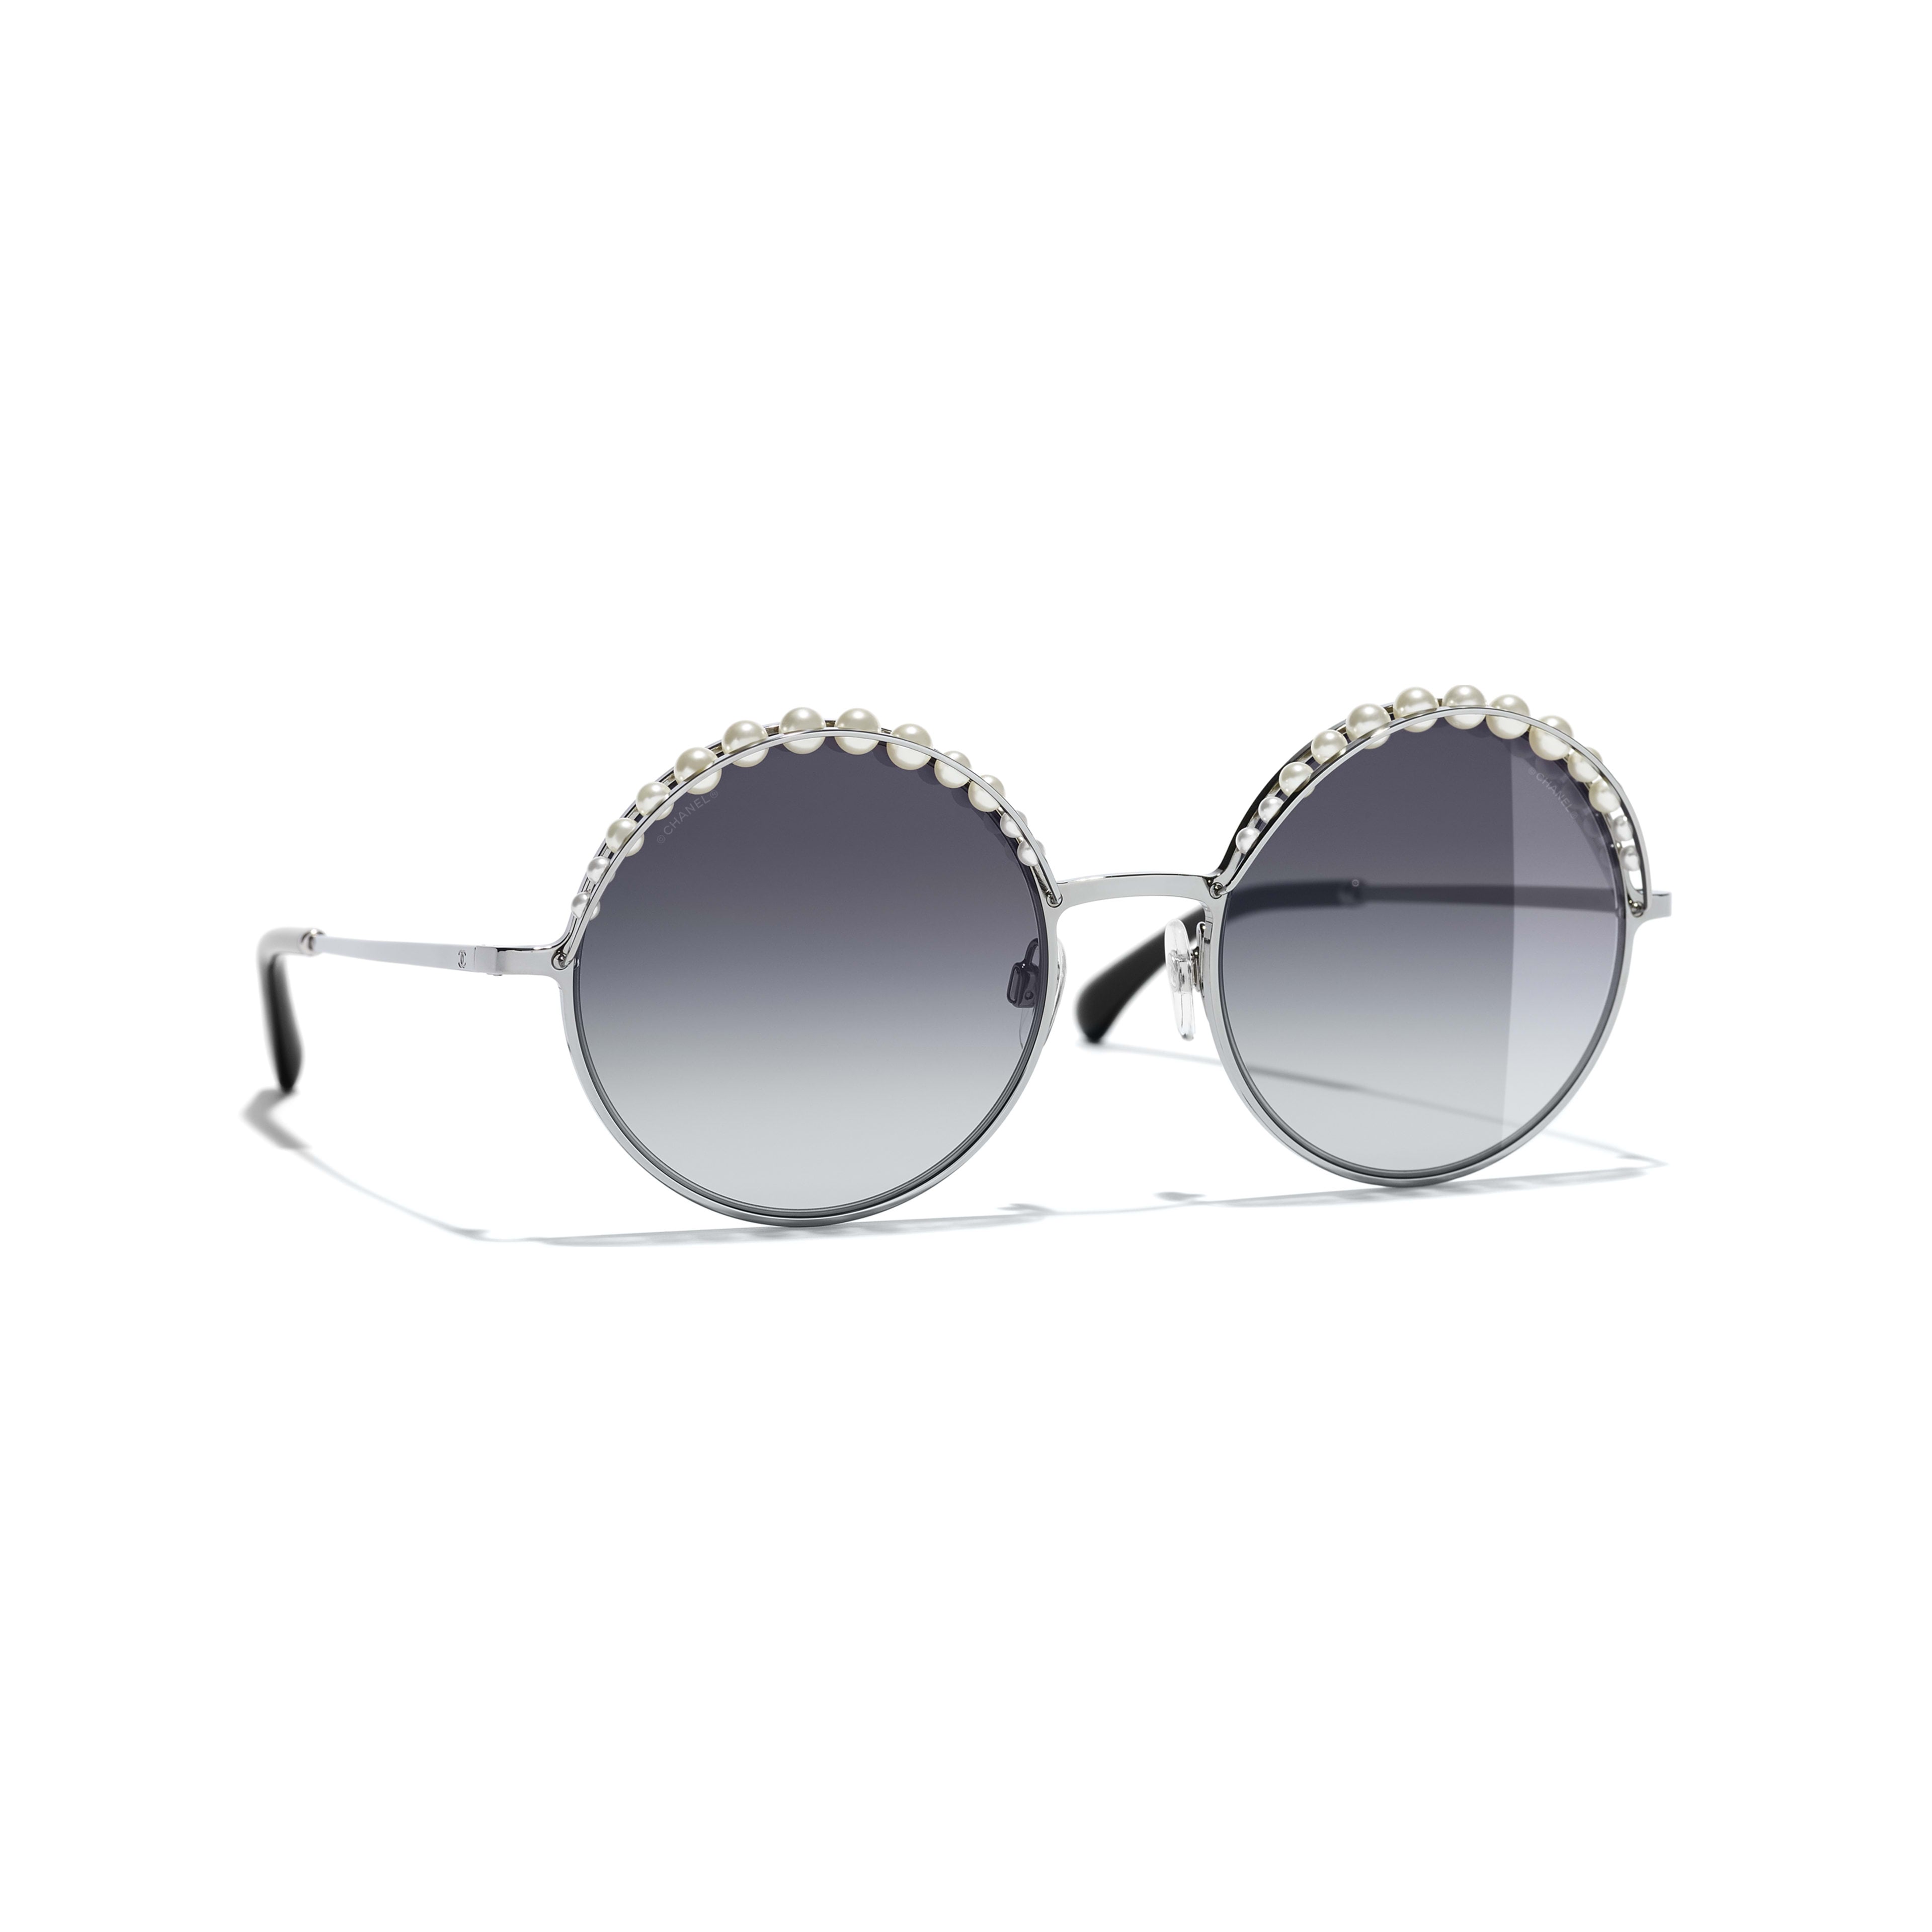 Chanel Round Metal Sunglasses in Gray